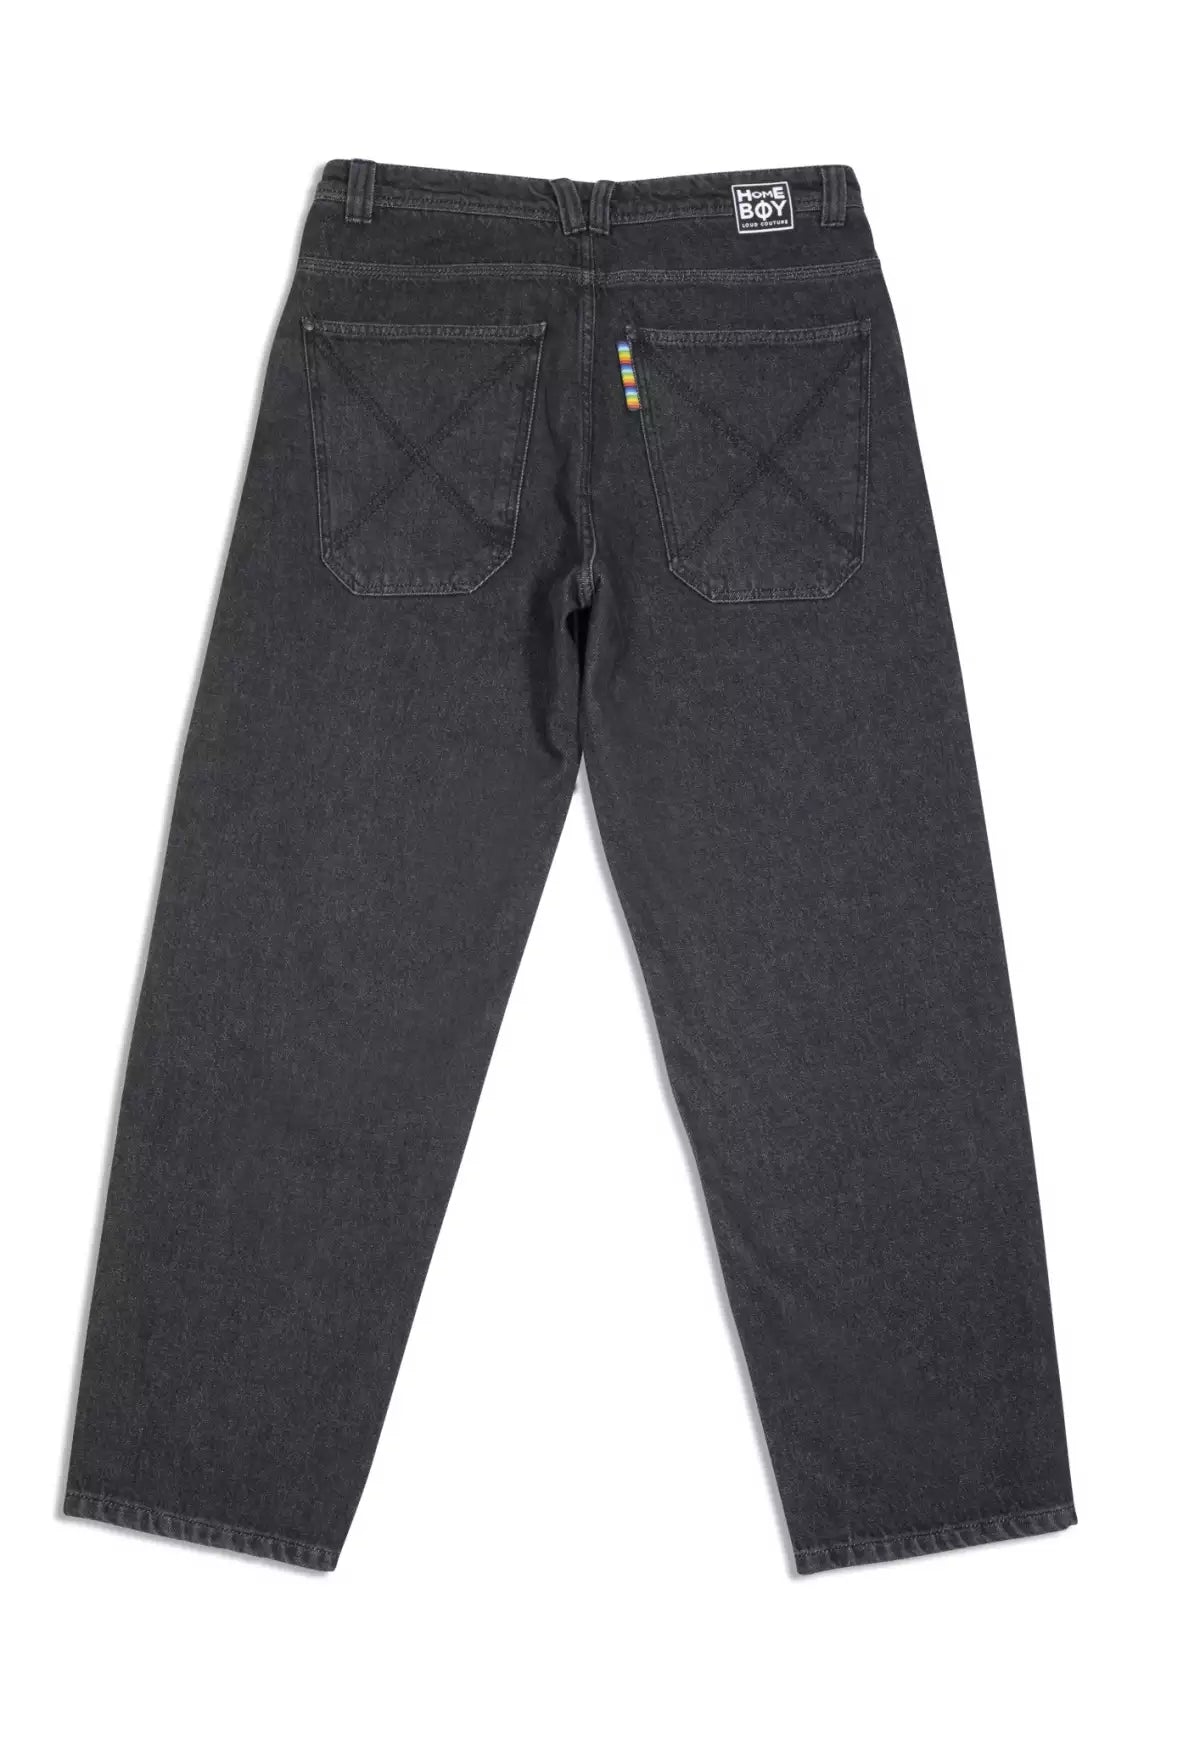 X-Tra Baggy Washed Black